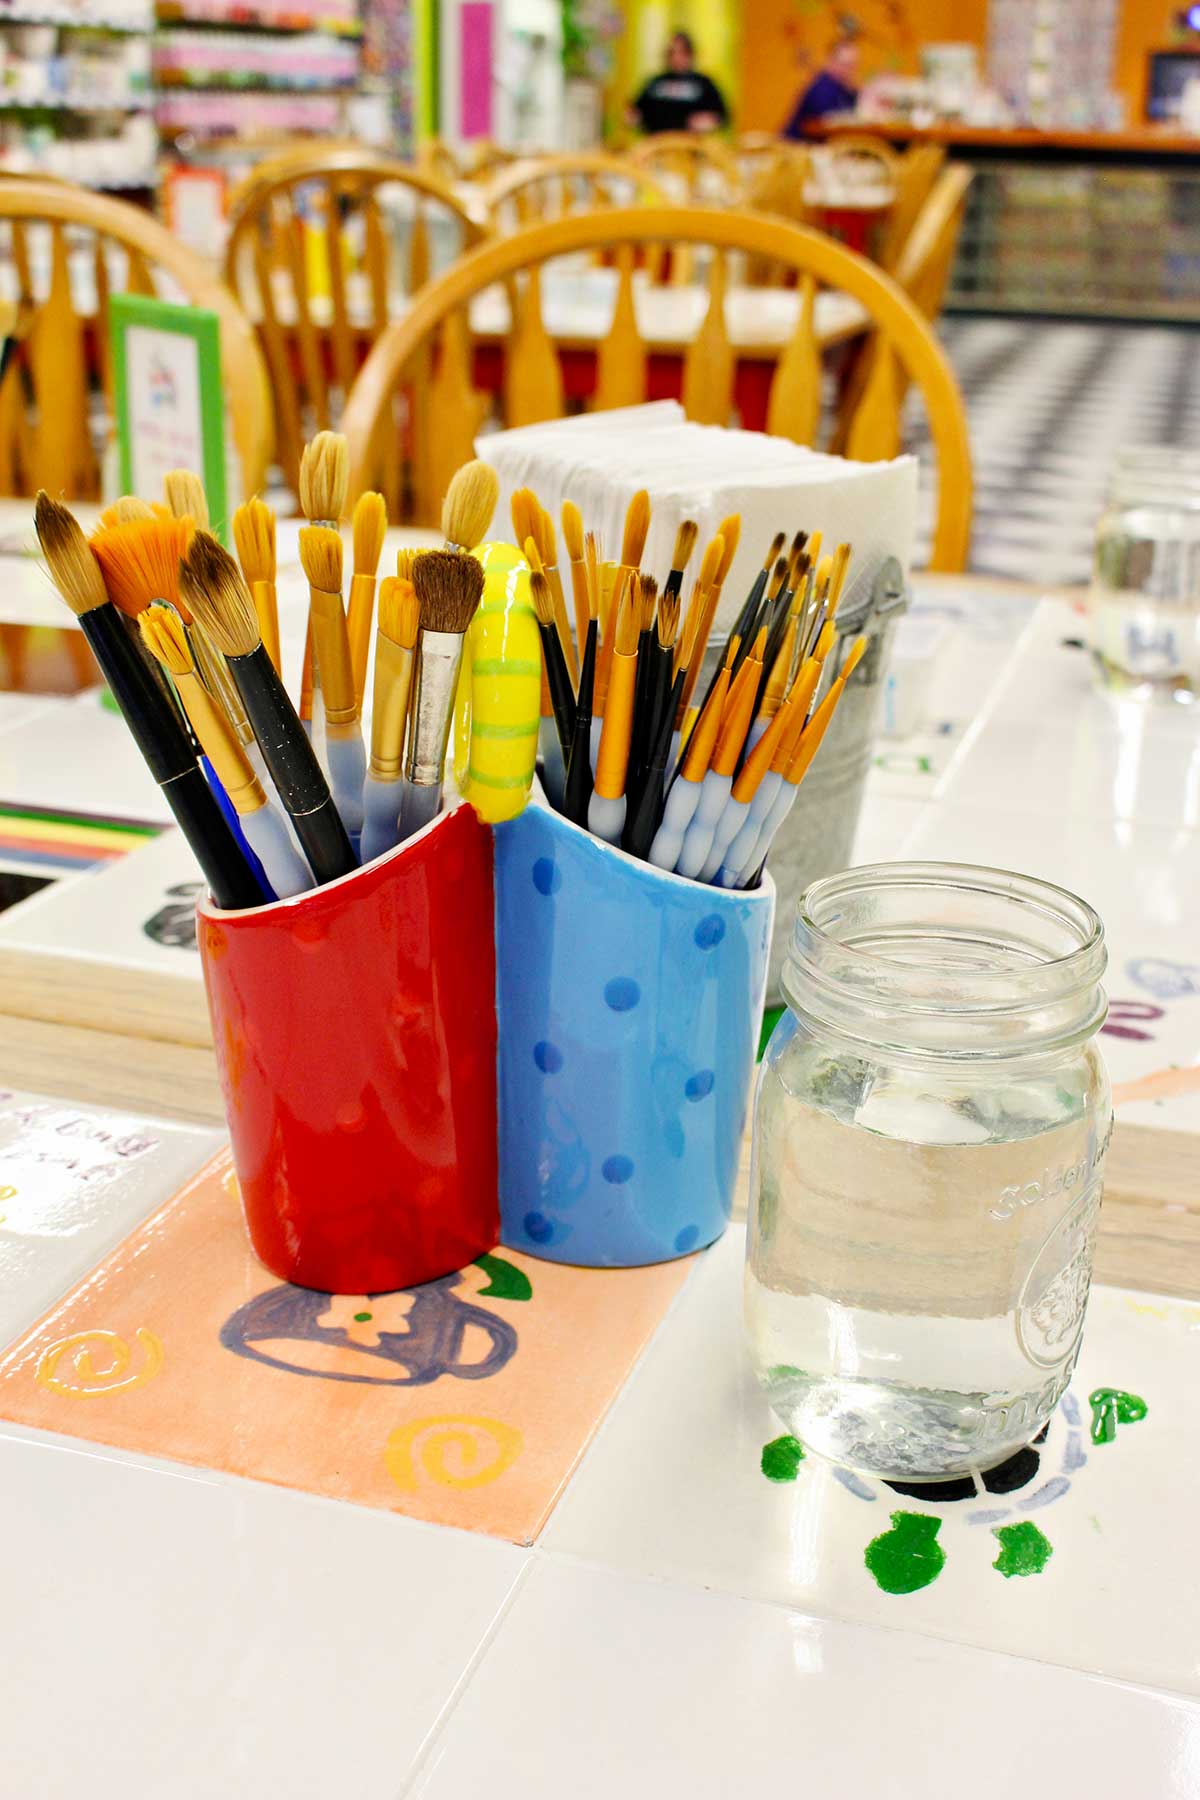 Cups of brushes and a jar of water on a table at the ceramic painting studio.